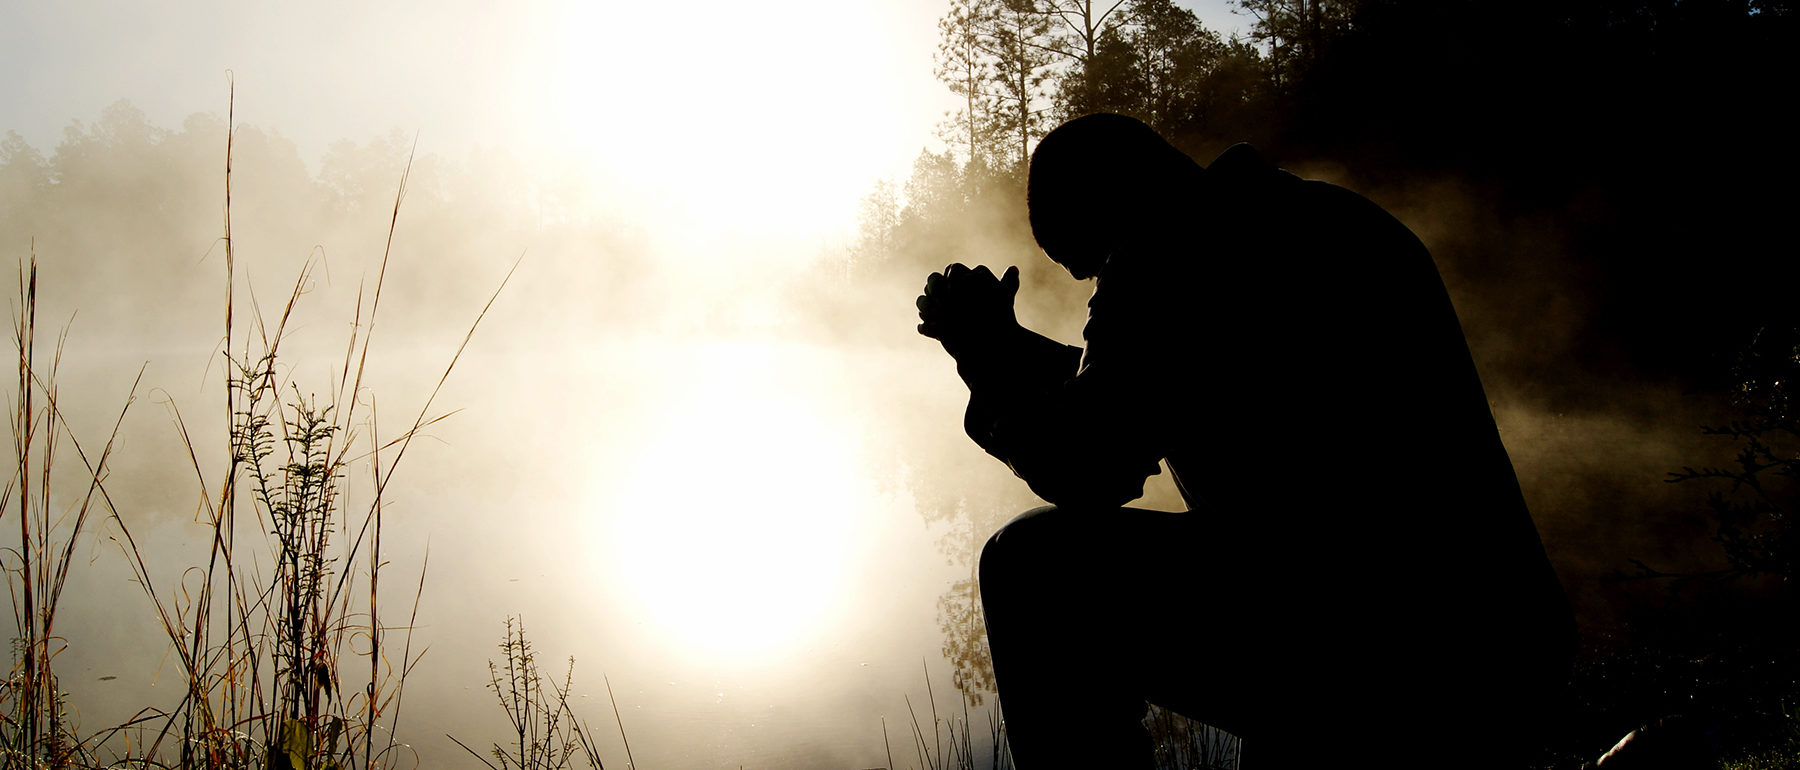 Silhouette of a man with elbows on his knees and hands folded in prayer